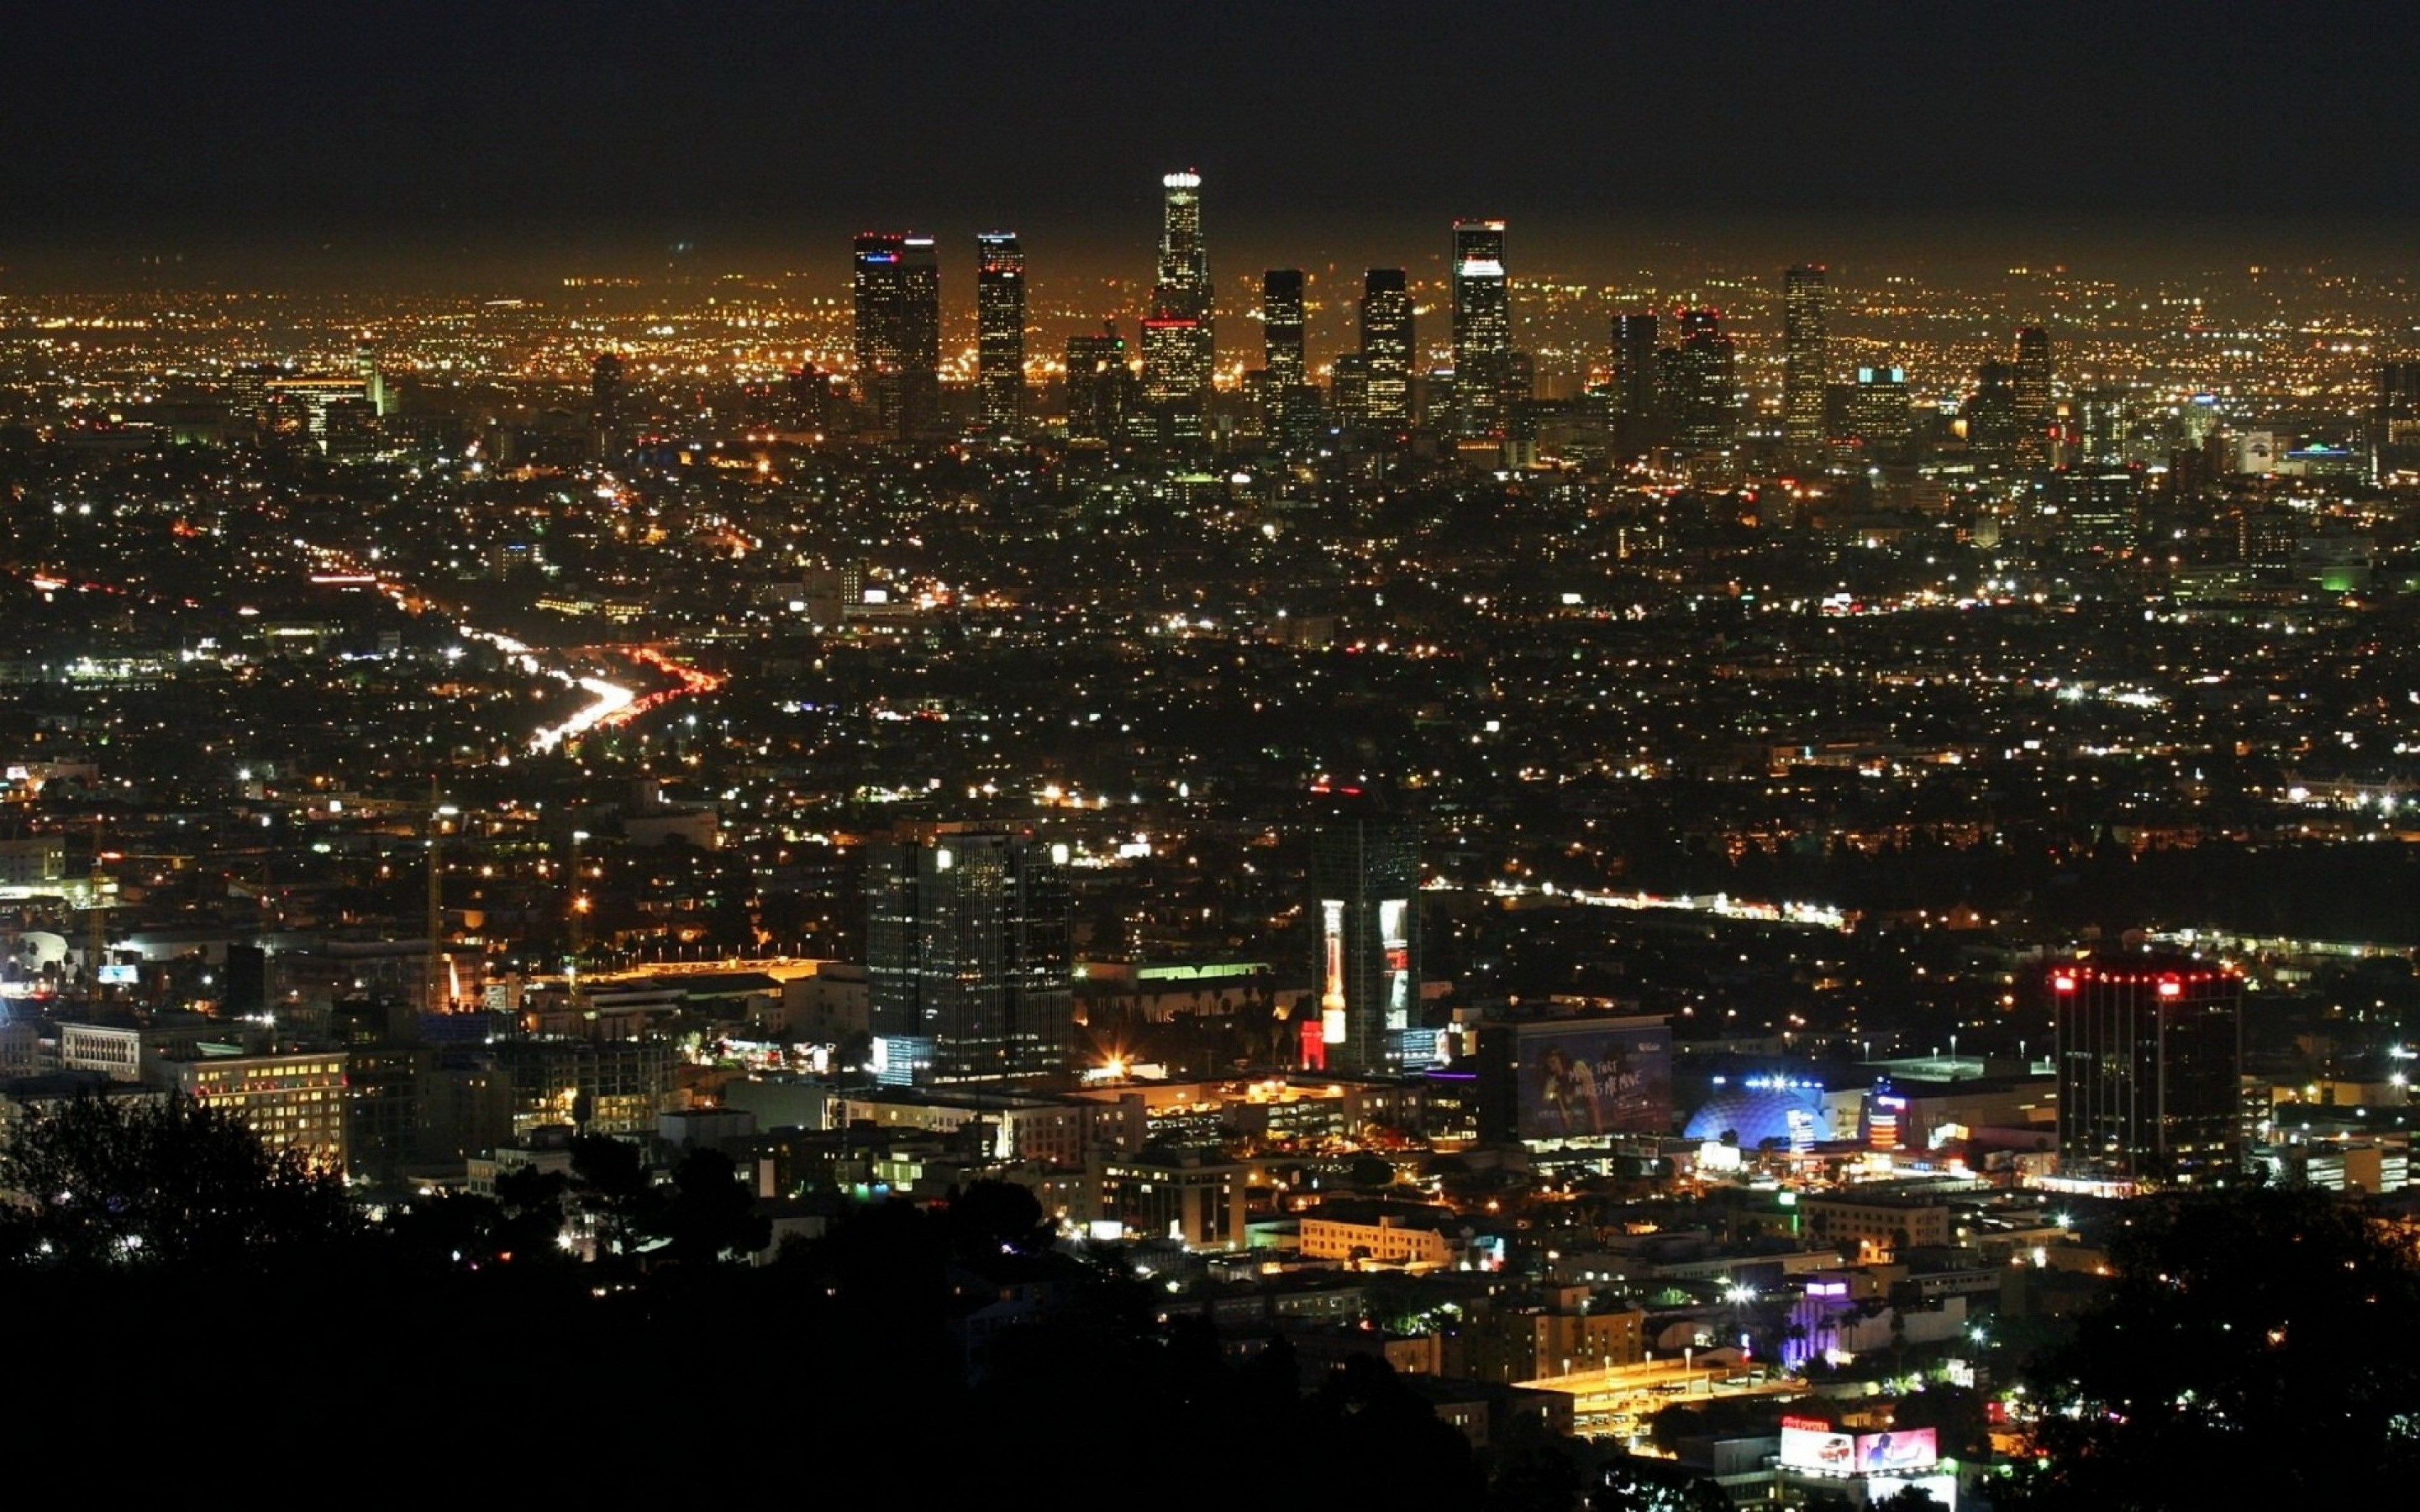 los angeles 4k ultra hd wallpapers » High quality walls